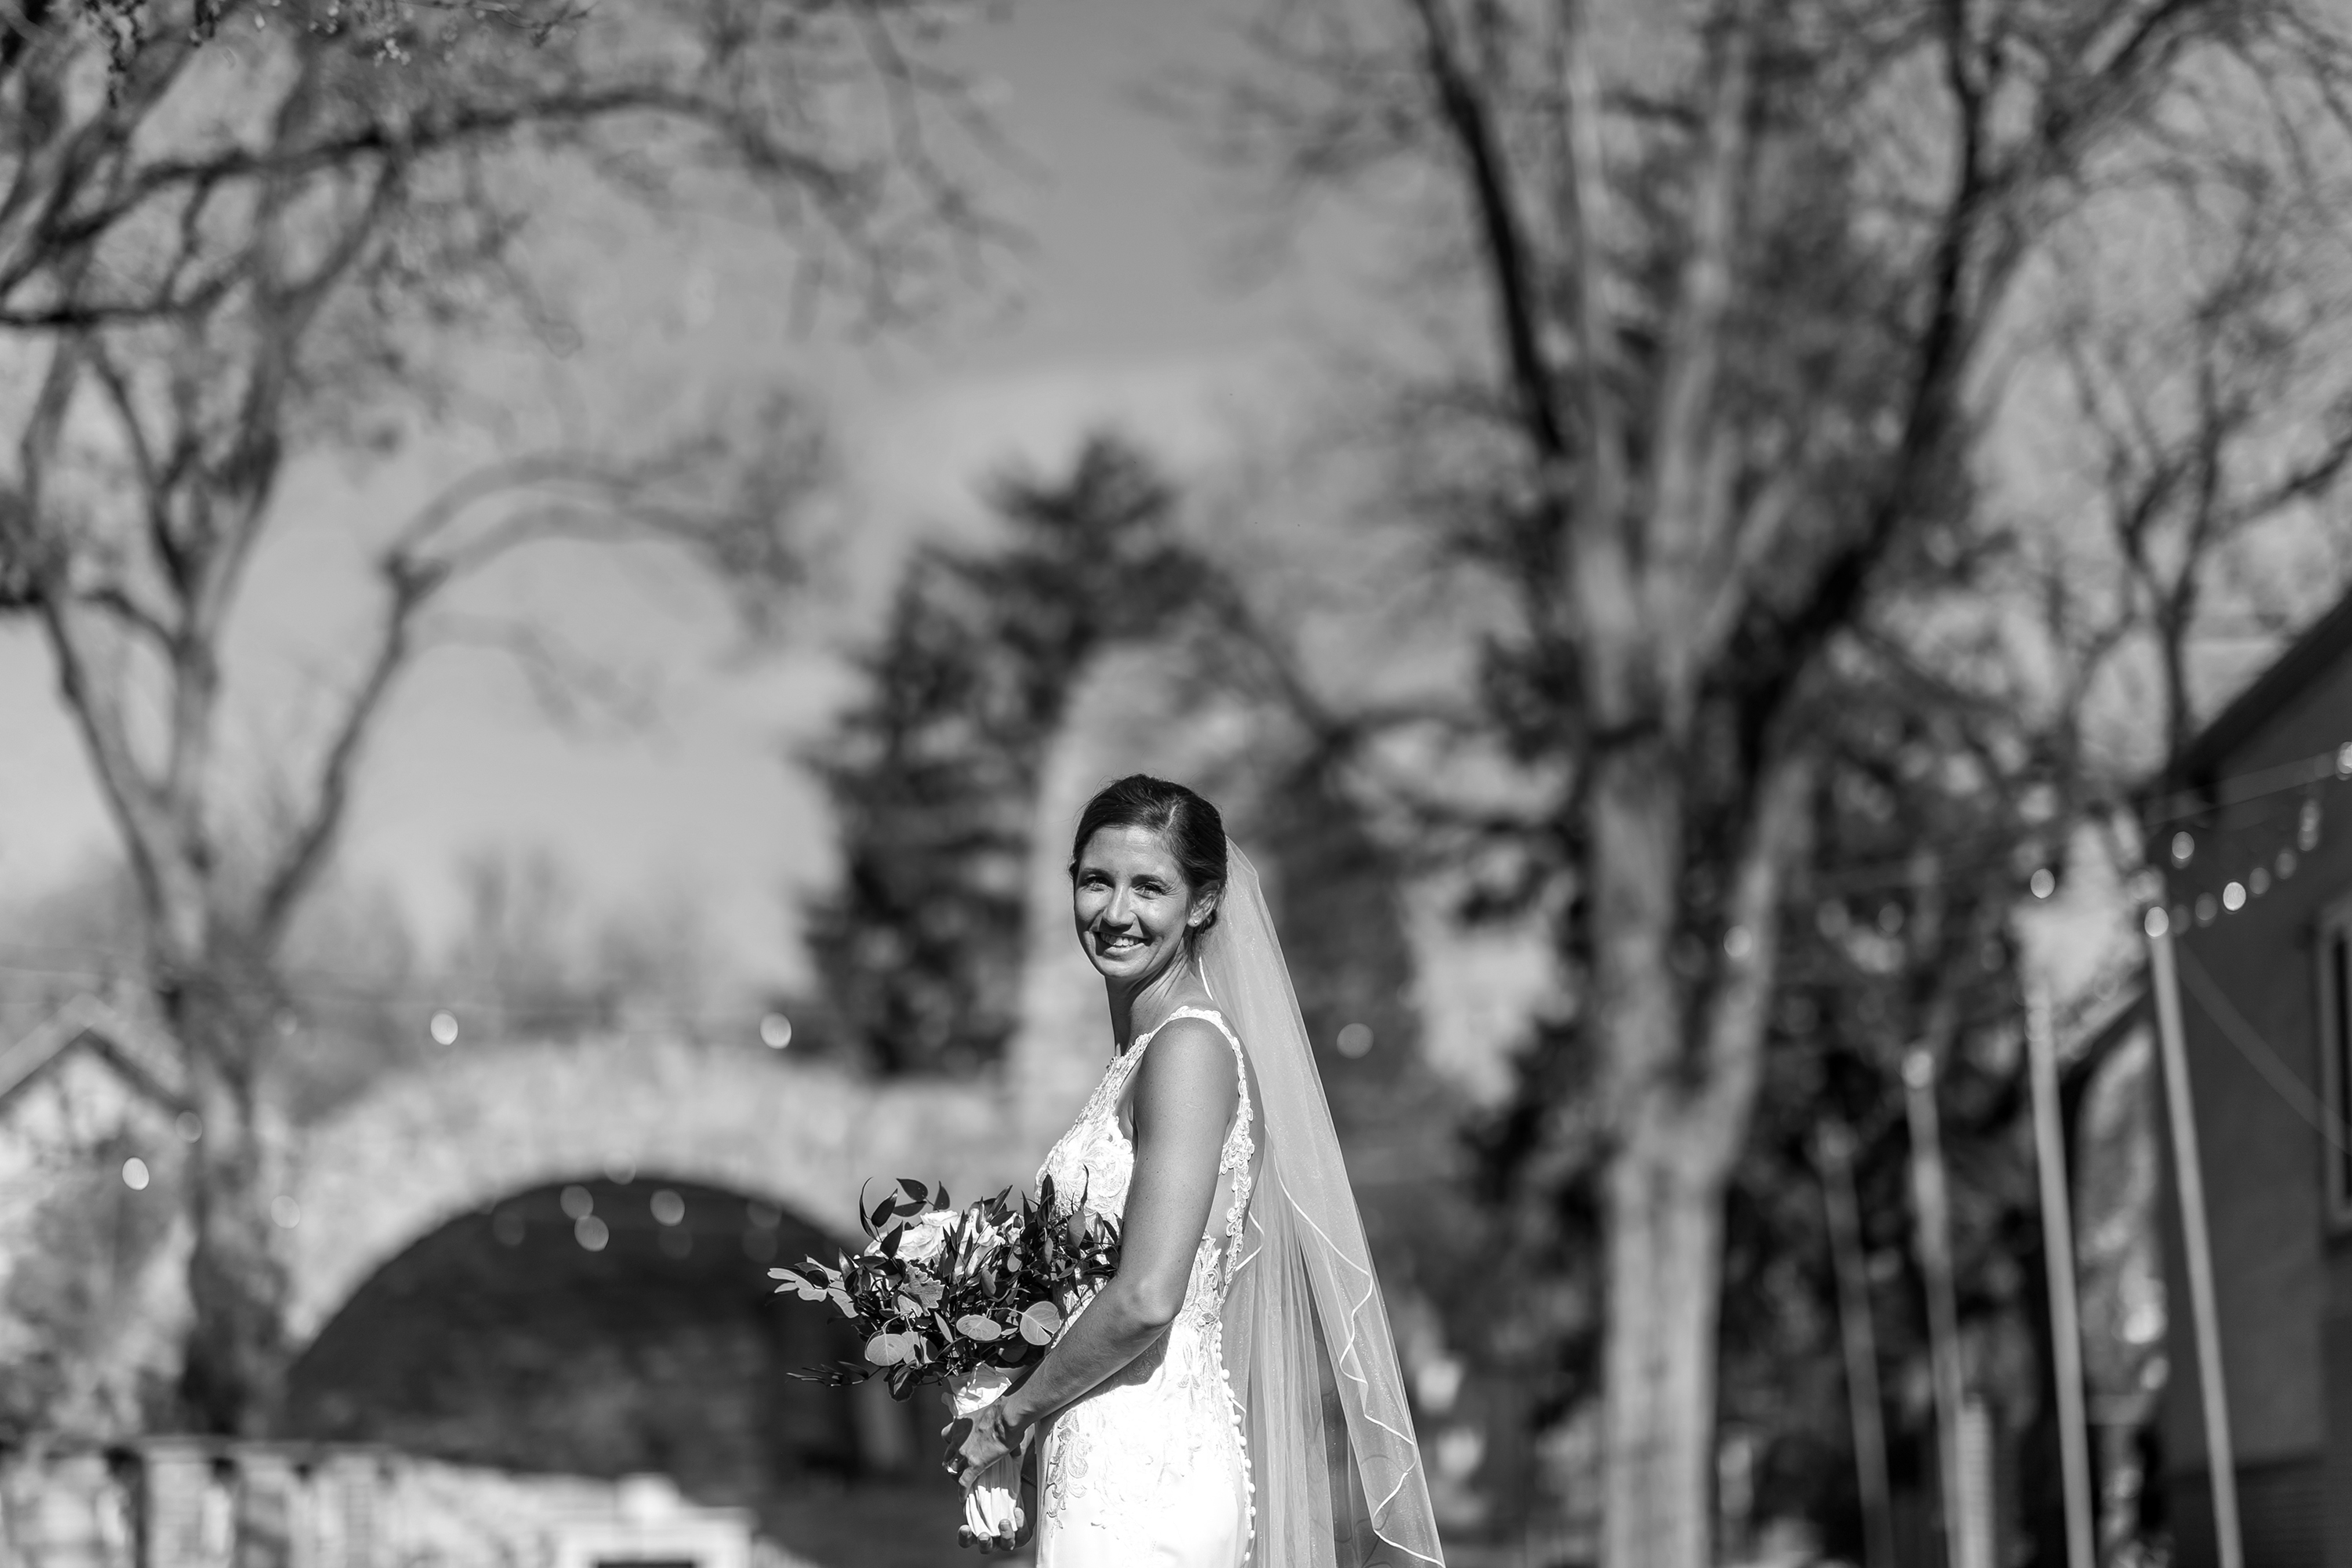 Bride poses after her wedding at Our Lady of Lourdes Catholic Church in Denver, Colorado